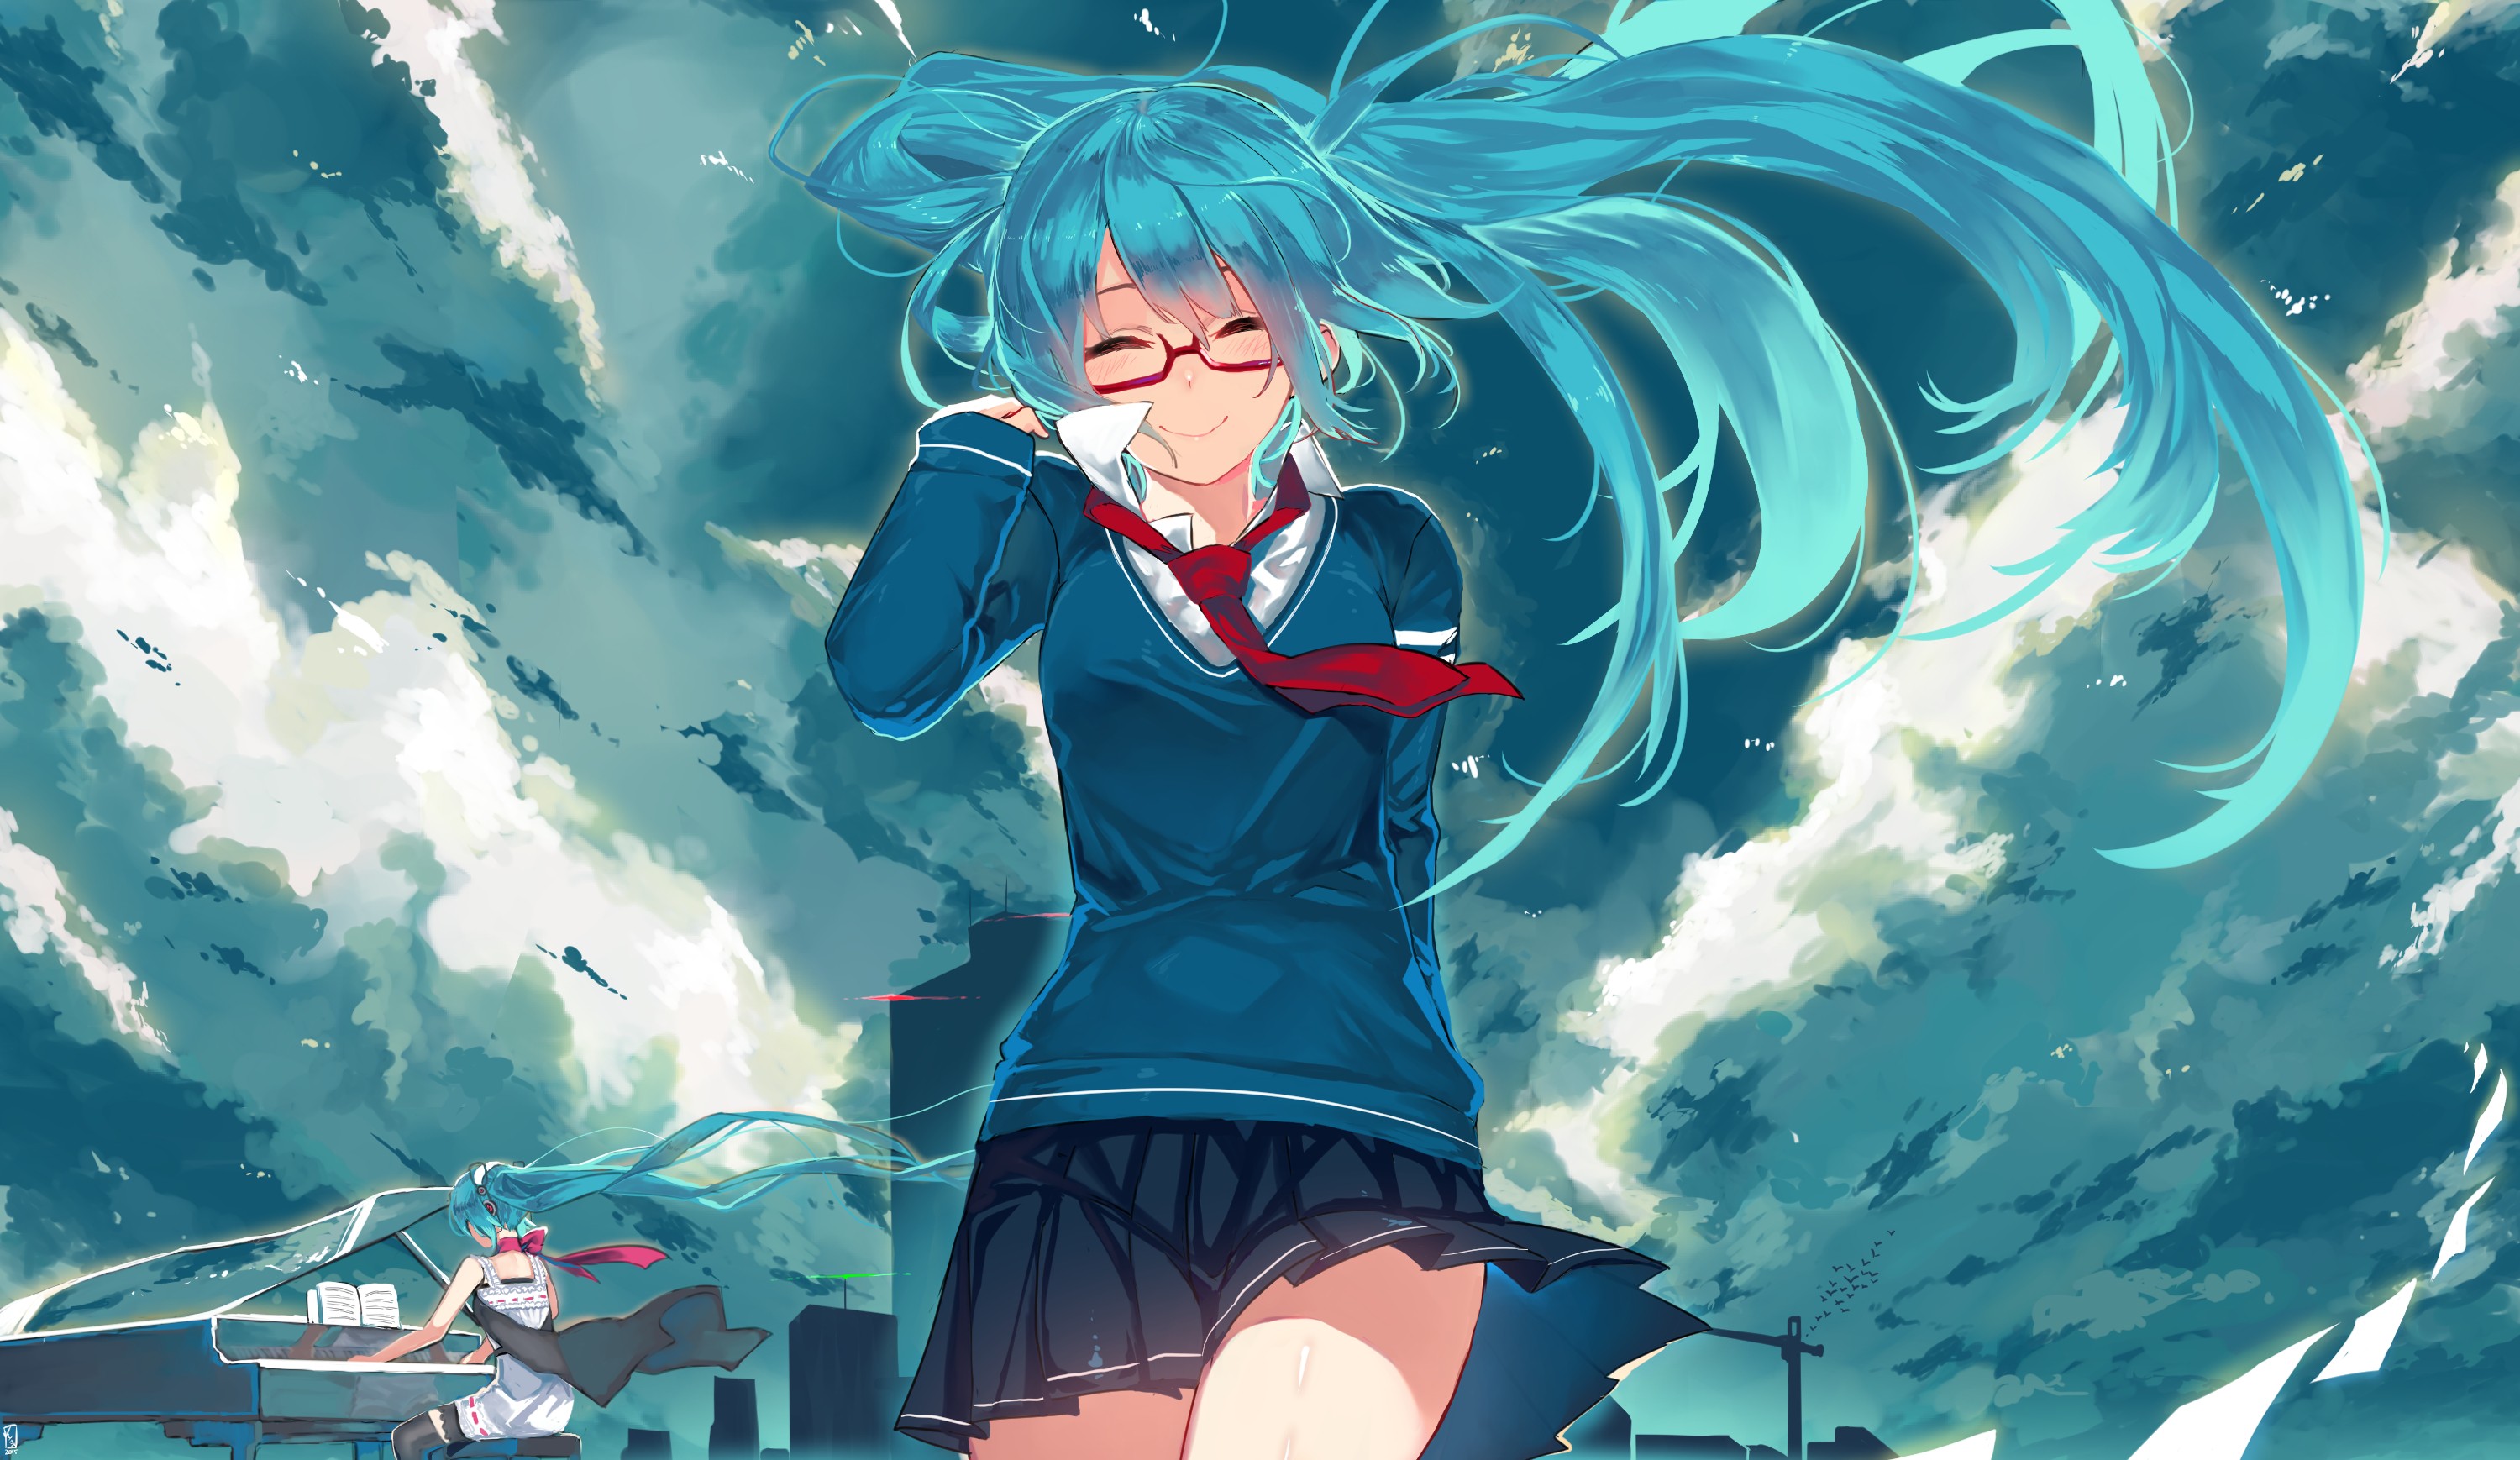 Anime 3000x1738 Vocaloid Hatsune Miku skirt anime girls glasses twintails cyan hair anime blue hair long hair smiling school uniform sky clouds windy women with glasses miniskirt piano musical instrument